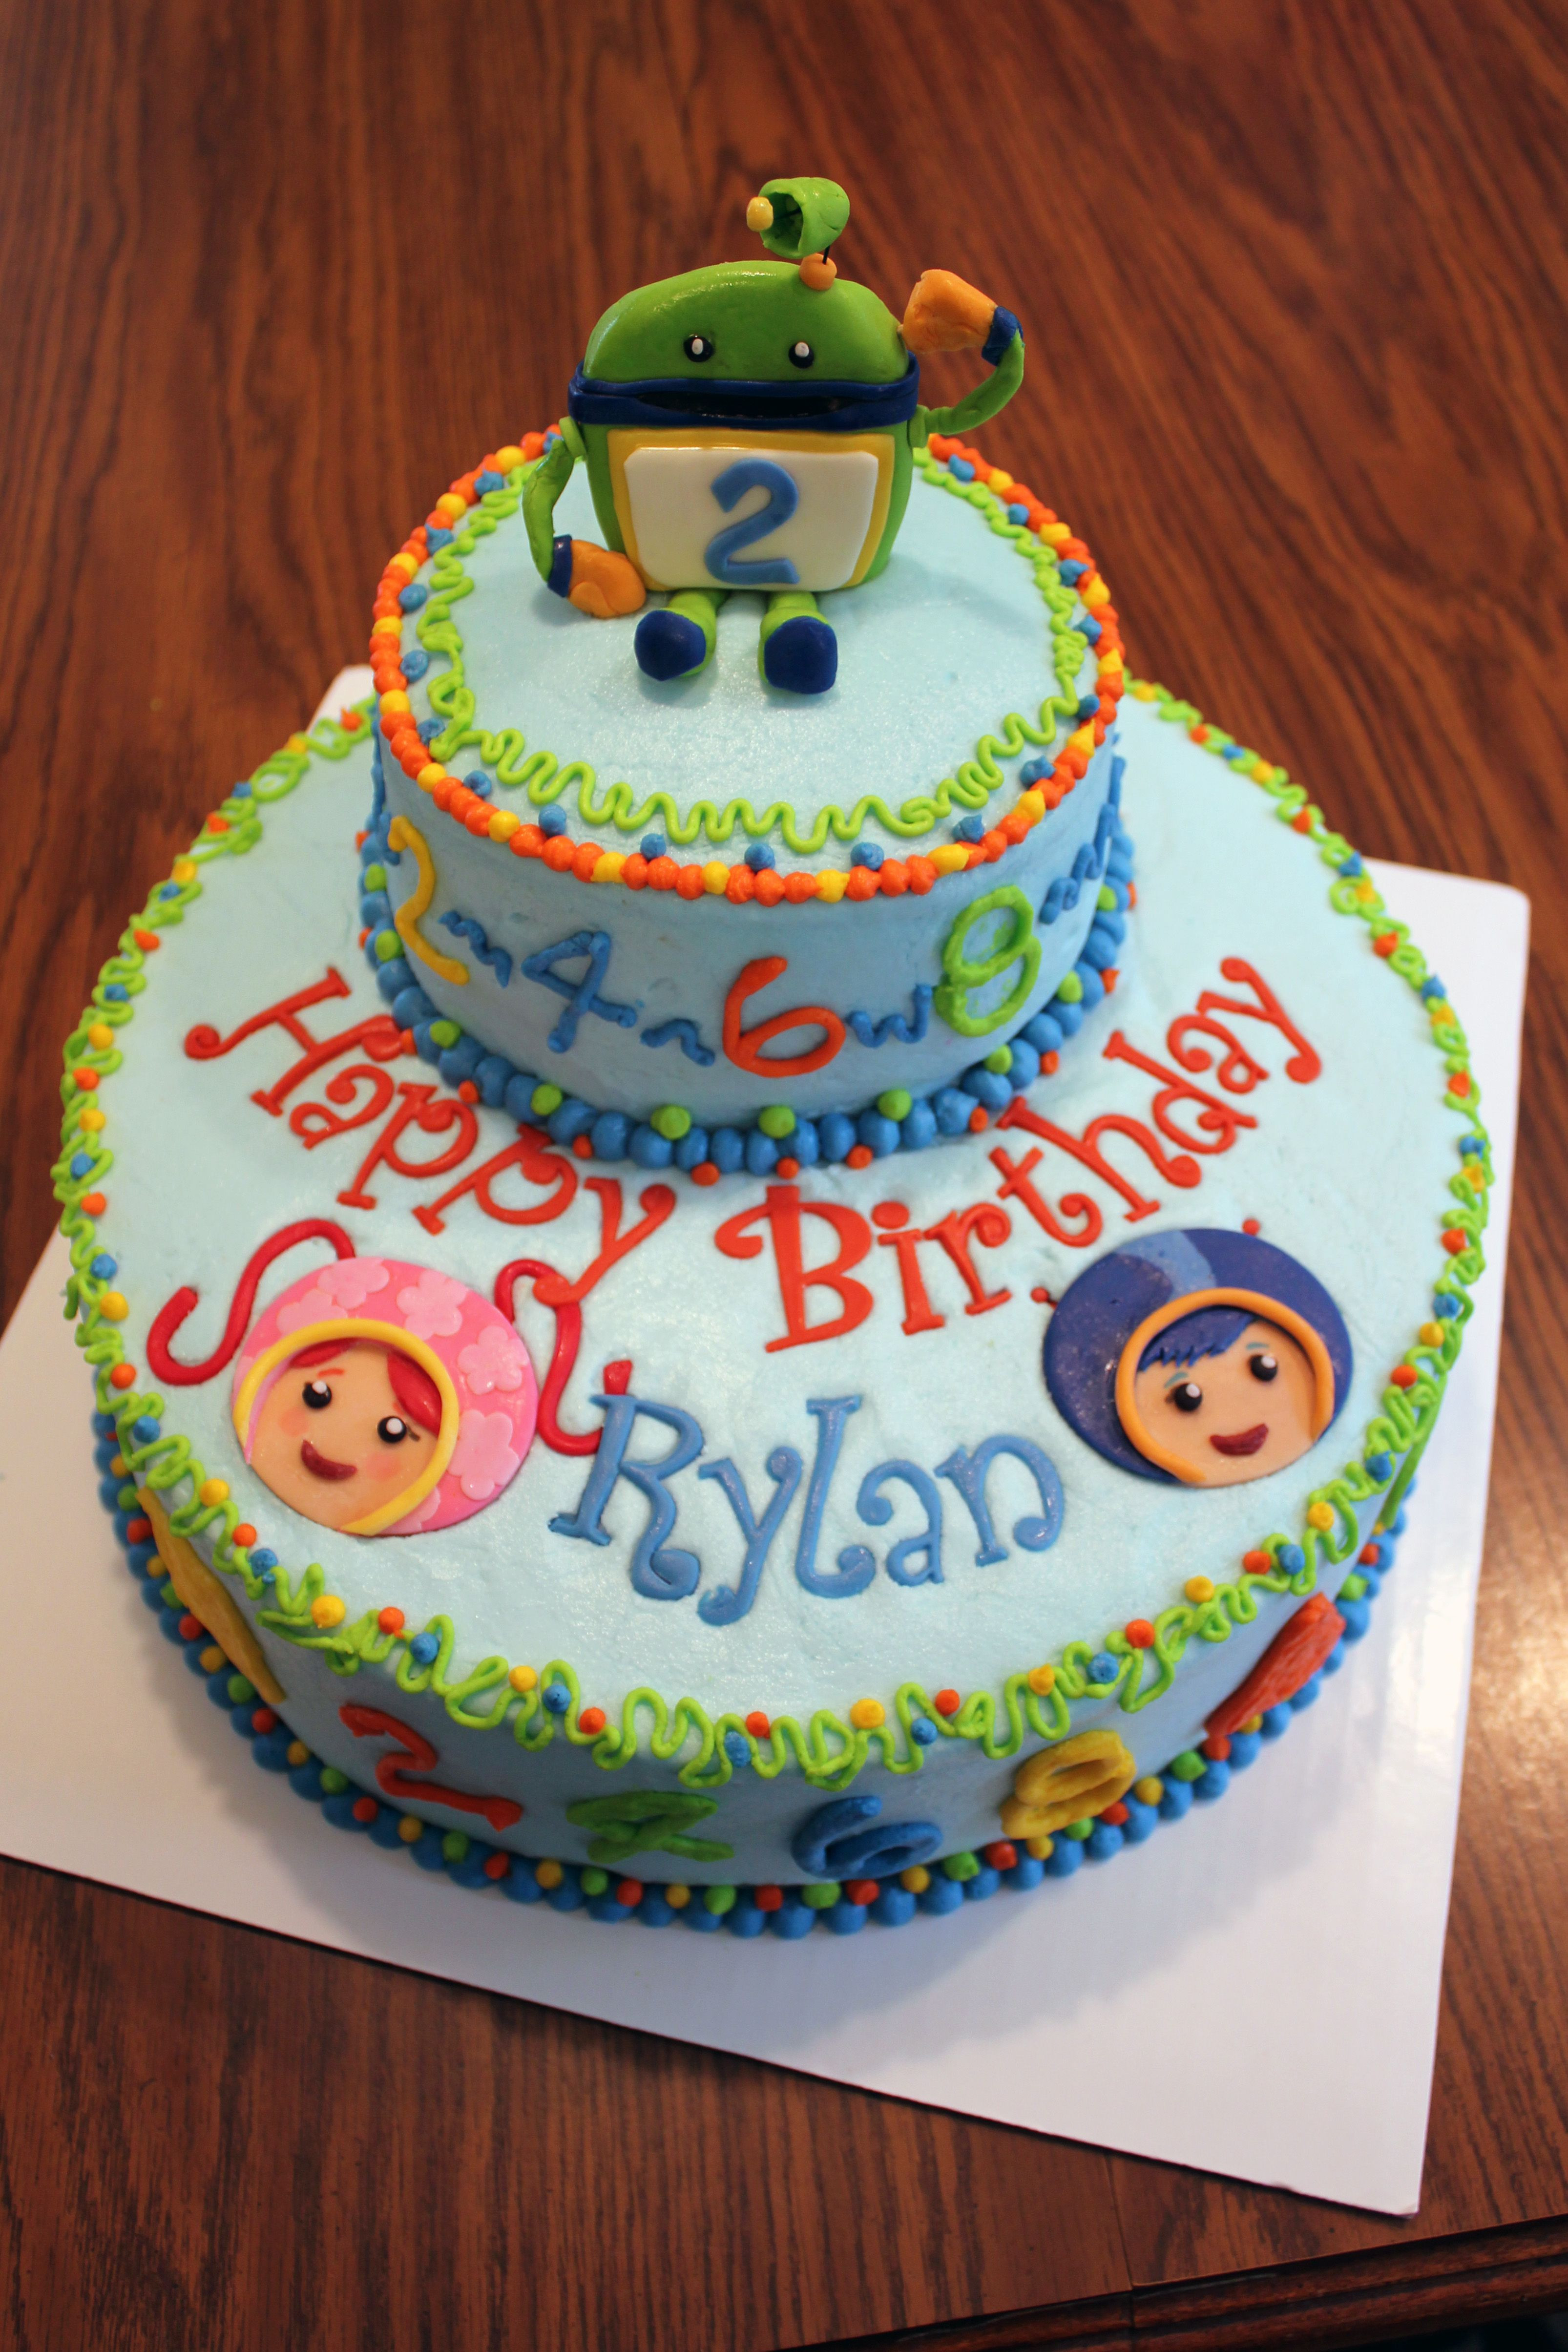 Birthday Cake With Name
 Team Umizoomi birthday cake Look at the name on the cake